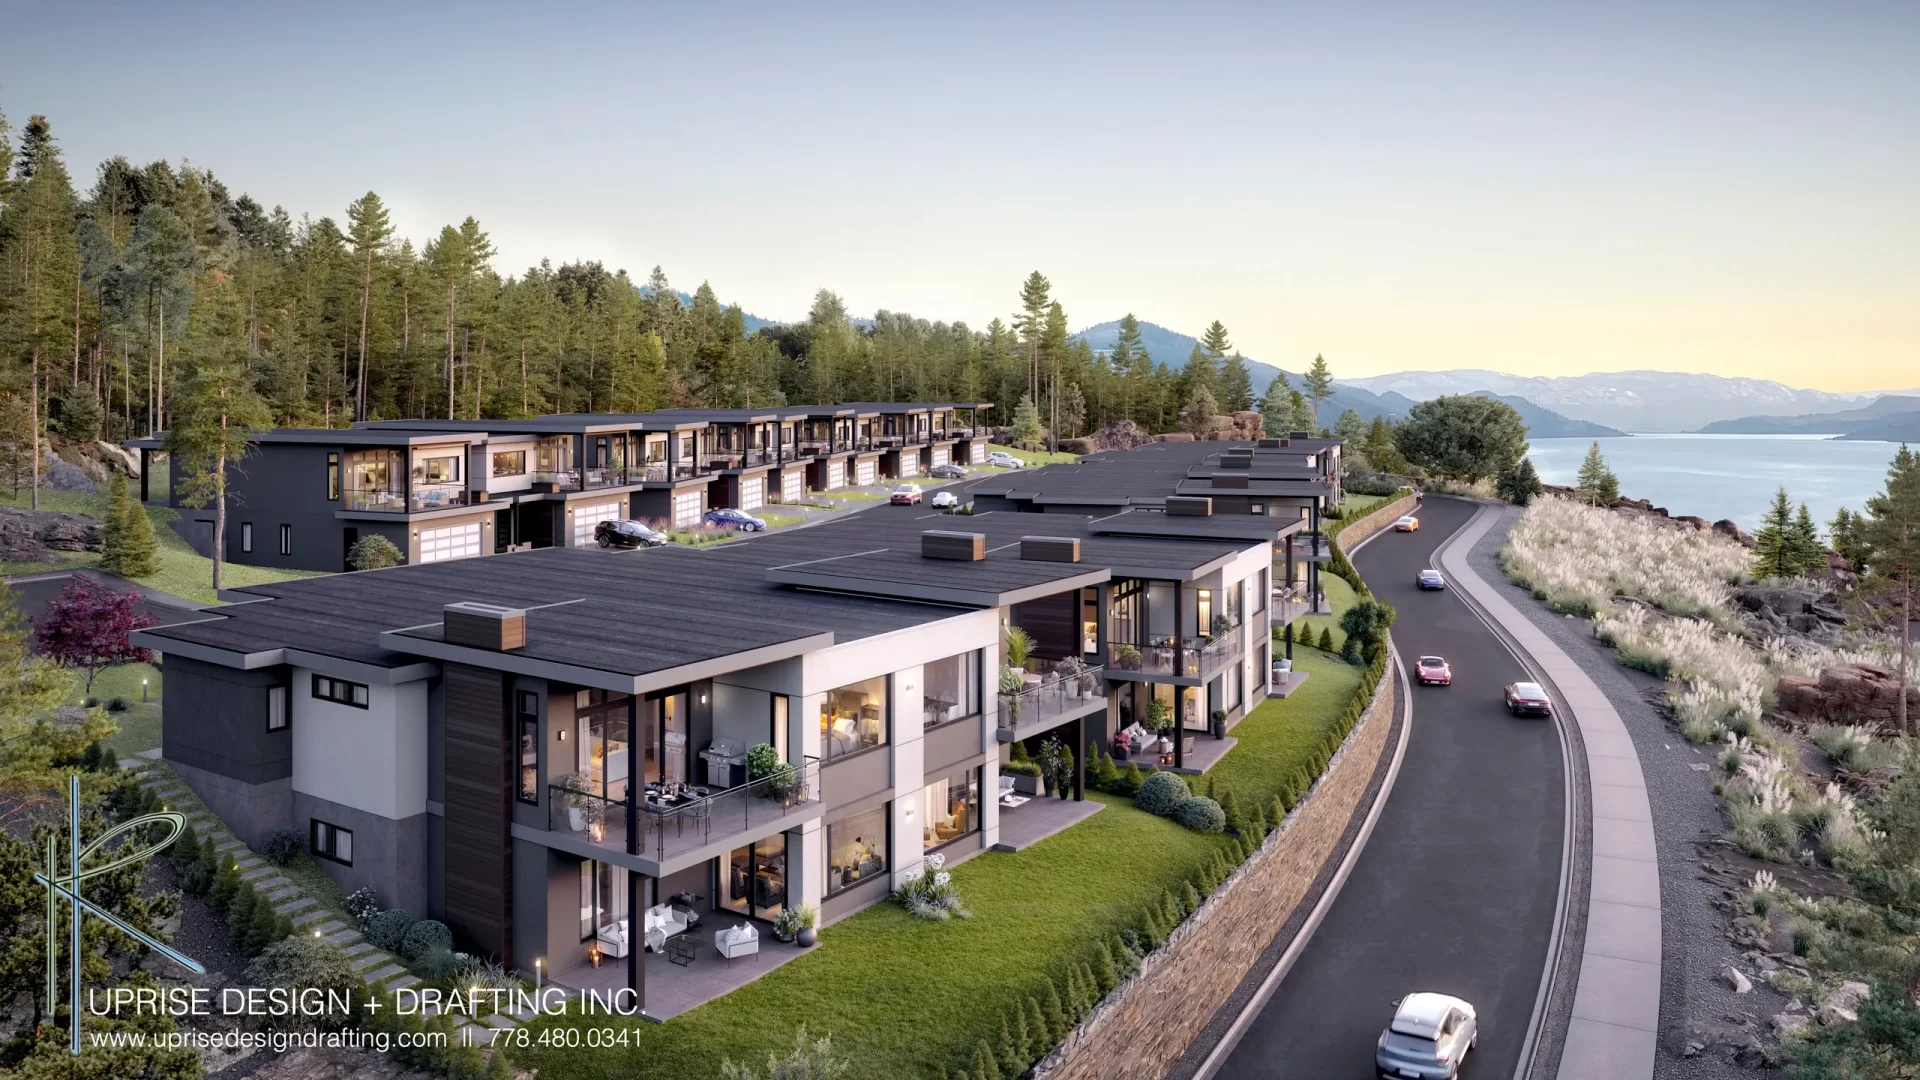 Perched on the side of beautiful Okanagan Lake, adjacent to the stunning community of Lakestone.